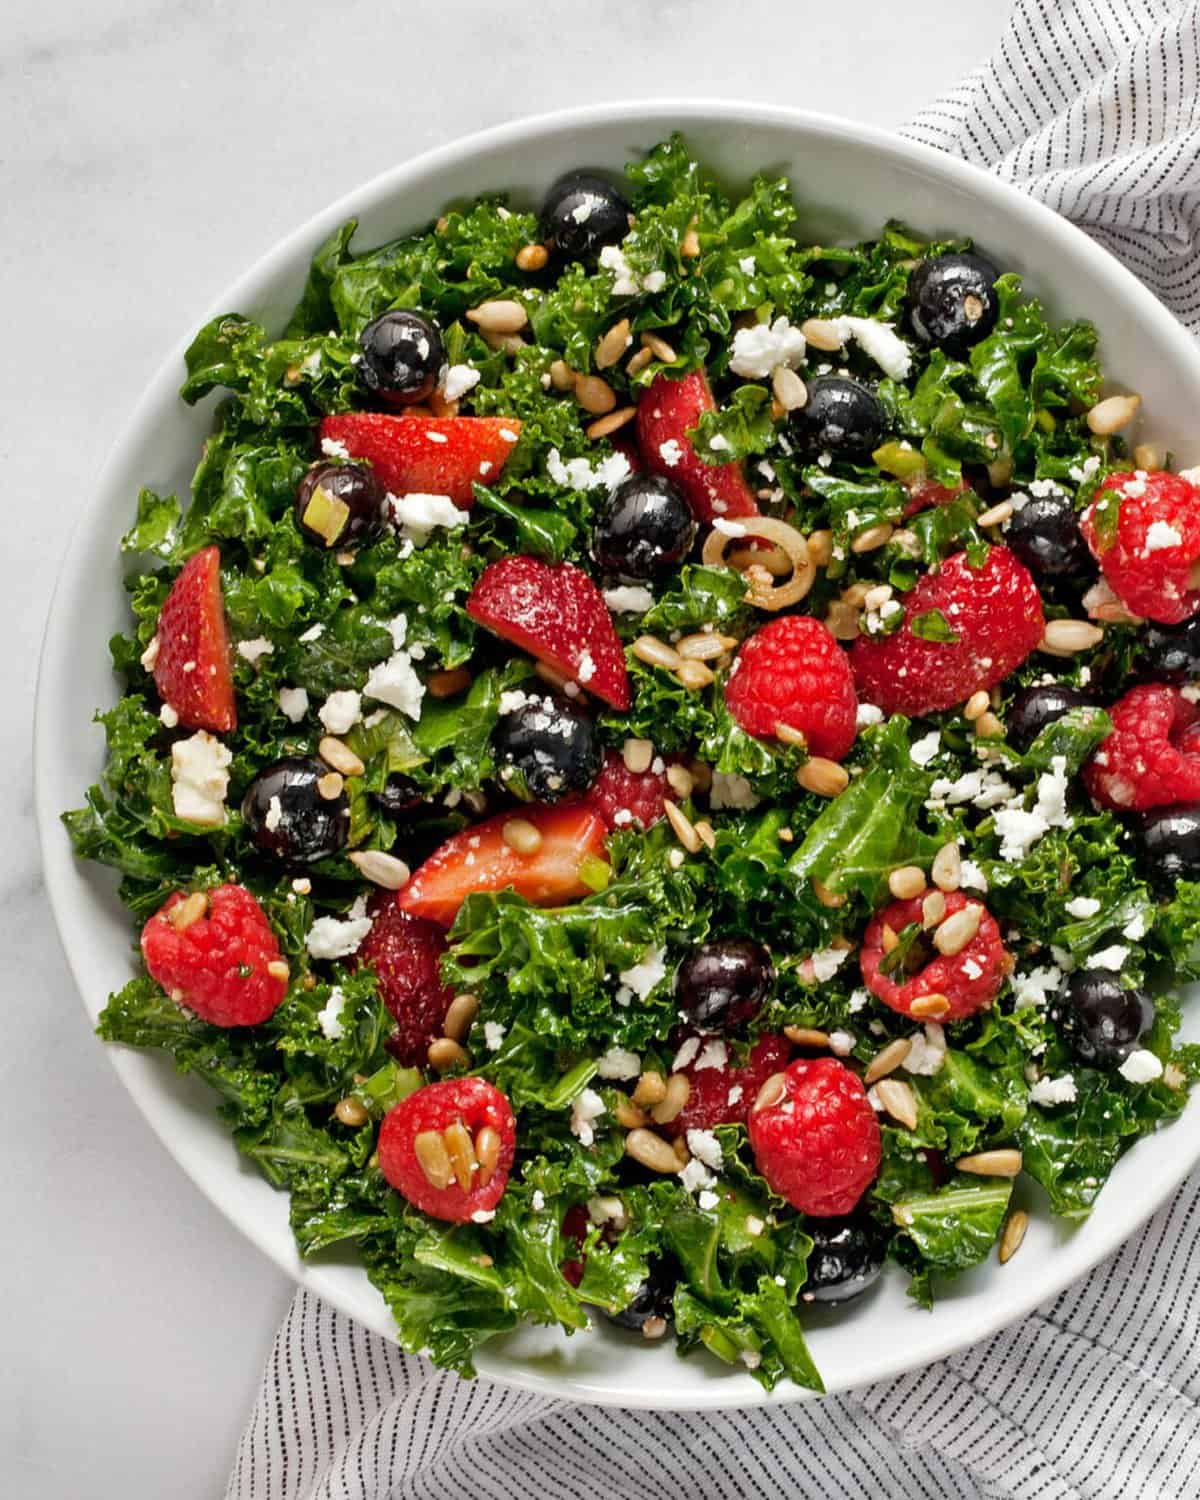 Mixed Berry Kale Salad with Goat Cheese | Last Ingredient